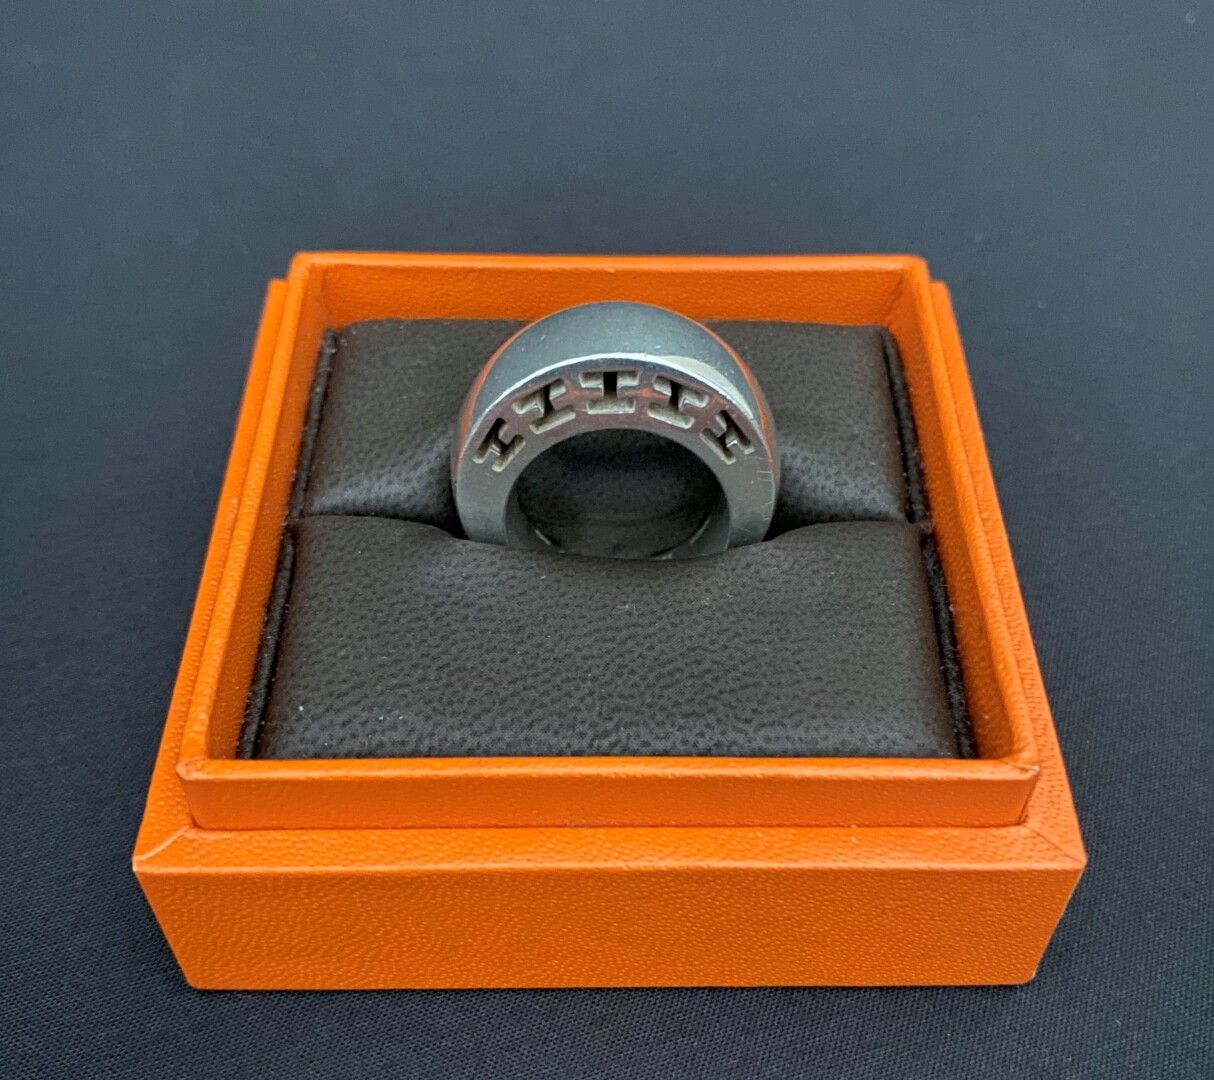 Null HERMES - Ring Clarté model in silver 925 thousandths - signed - Weight : 25&hellip;